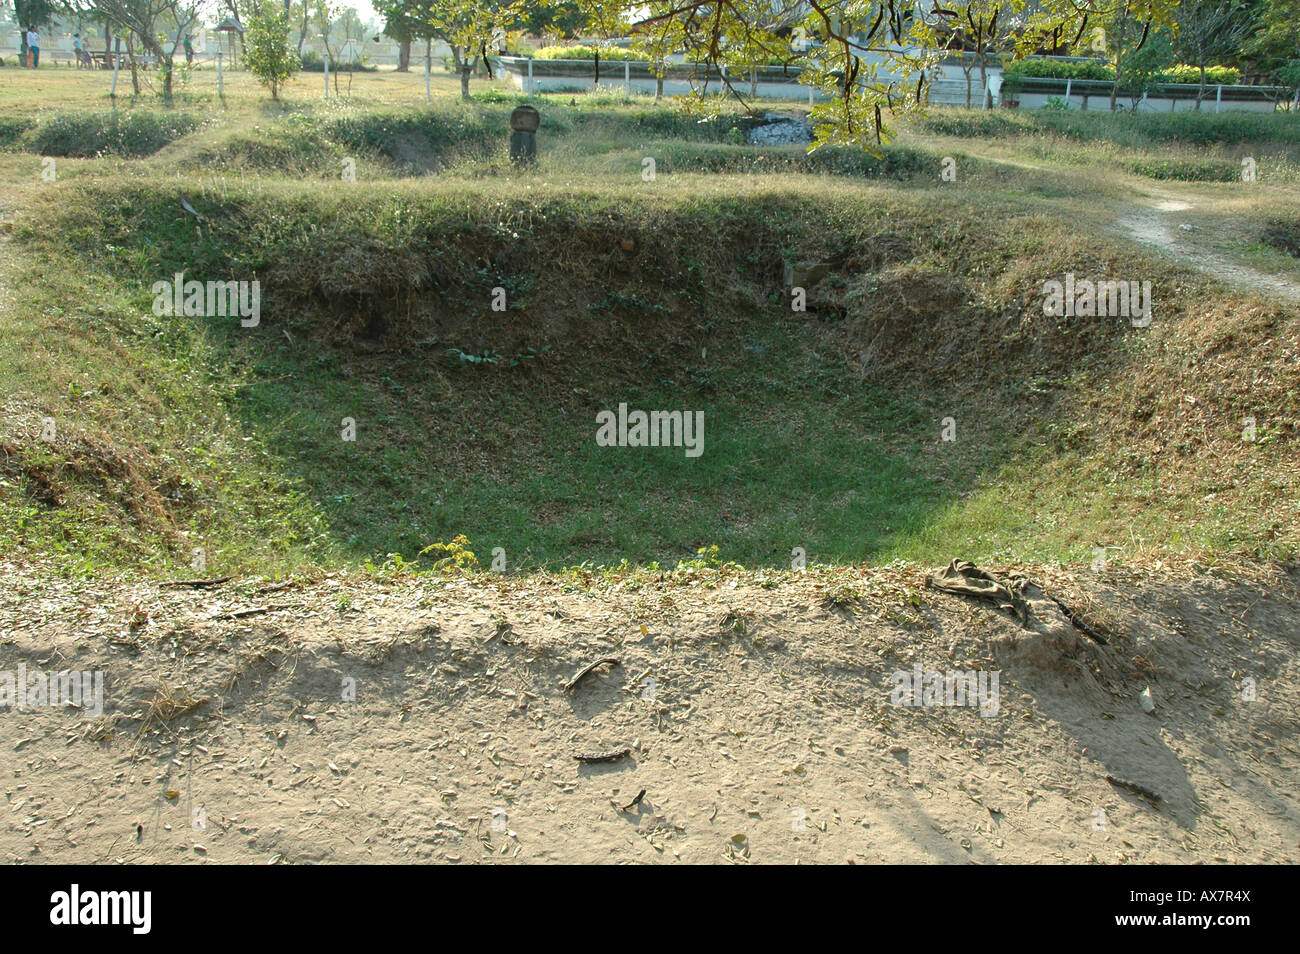 One of the excavated mass graves at The Killing Fields of Choeung Ek near Phnom Penh Cambodia Stock Photo